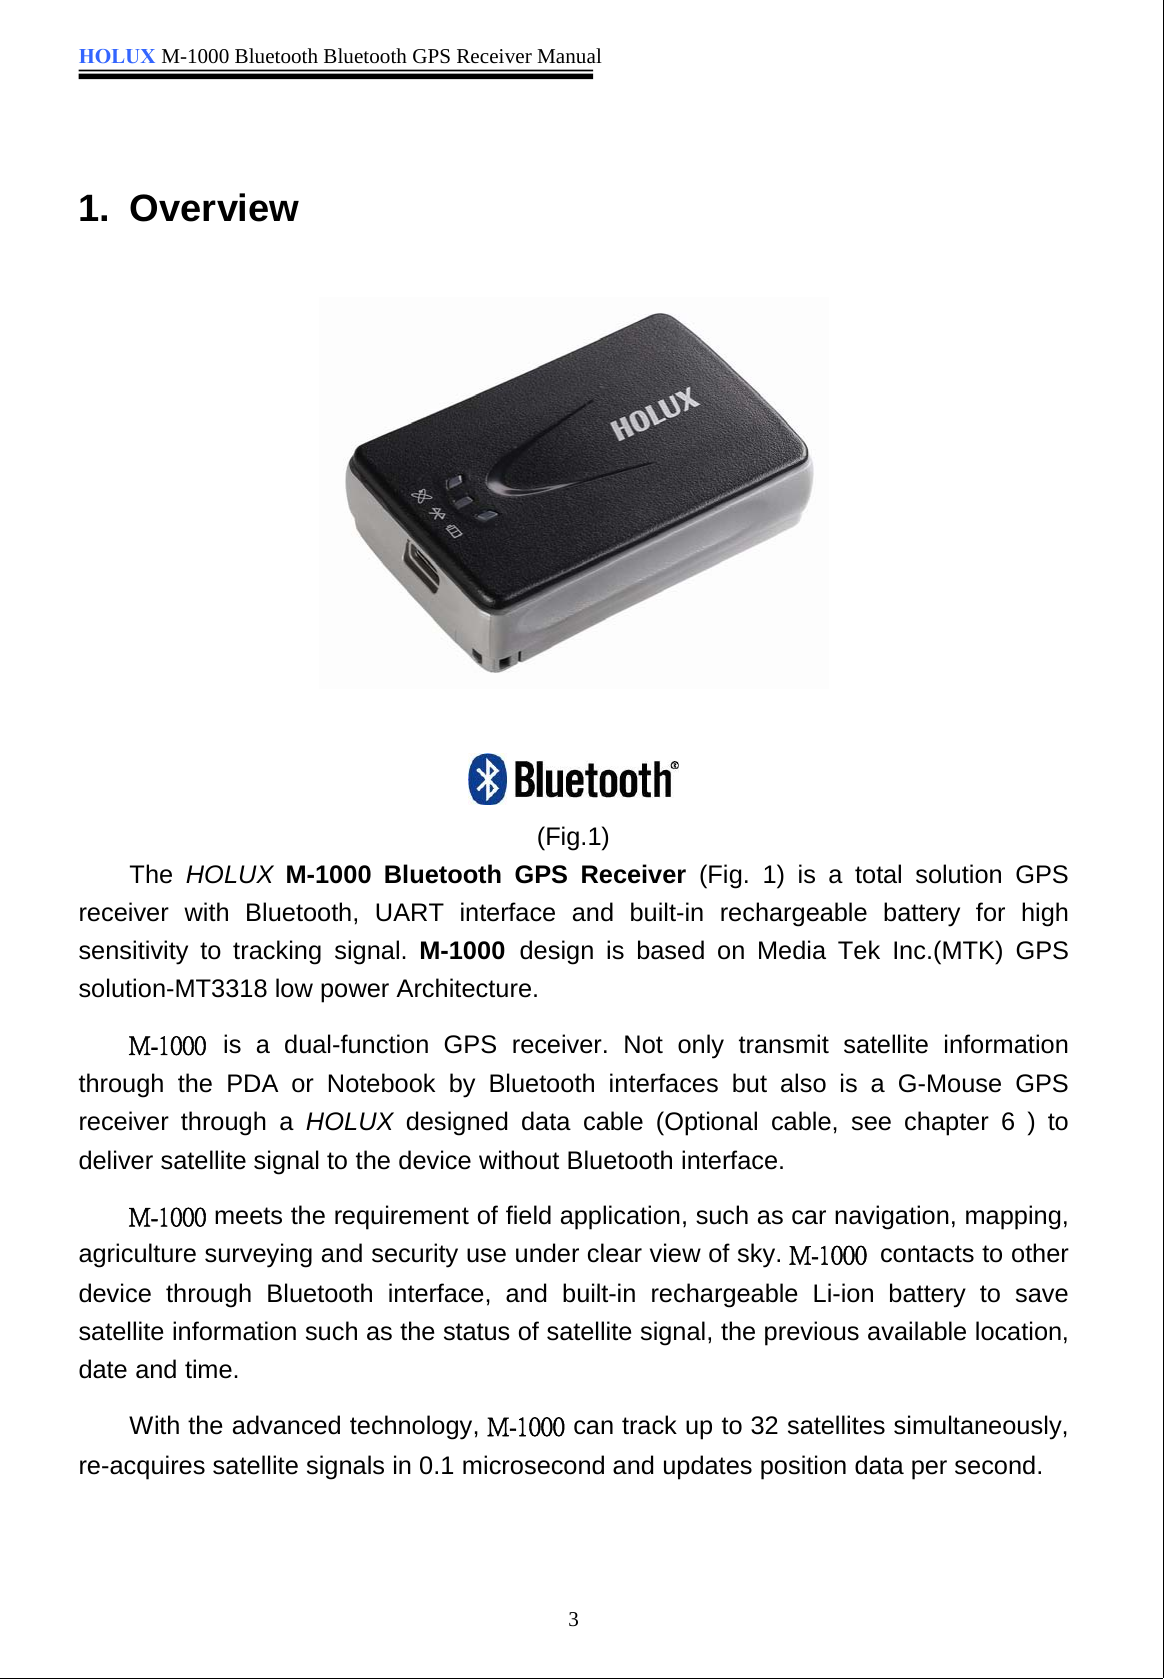 HOLUX M-1000 Bluetooth Bluetooth GPS Receiver Manual31. Overview(Fig.1)The HOLUX M-1000 Bluetooth GPS Receiver (Fig. 1) is a total solution GPSreceiver with Bluetooth, UART interface and built-in rechargeable battery for highsensitivity to tracking signal. M-1000 design is based on Media Tek Inc.(MTK) GPSsolution-MT3318 low power Architecture. is a dual-function GPS receiver. Not only transmit satellite informationthrough the PDA or Notebook by Bluetooth interfaces but also is a G-Mouse GPSreceiver through a HOLUX designed data cable (Optional cable, see chapter 6 ) todeliver satellite signal to the device without Bluetooth interface. meets the requirement of field application, such as car navigation, mapping,agriculture surveying and security use under clear view of sky.  contacts to otherdevice through Bluetooth interface, and built-in rechargeable Li-ion battery to savesatellite information such as the status of satellite signal, the previous available location,date and time.With the advanced technology,  can track up to 32 satellites simultaneously,re-acquires satellite signals in 0.1 microsecond and updates position data per second.